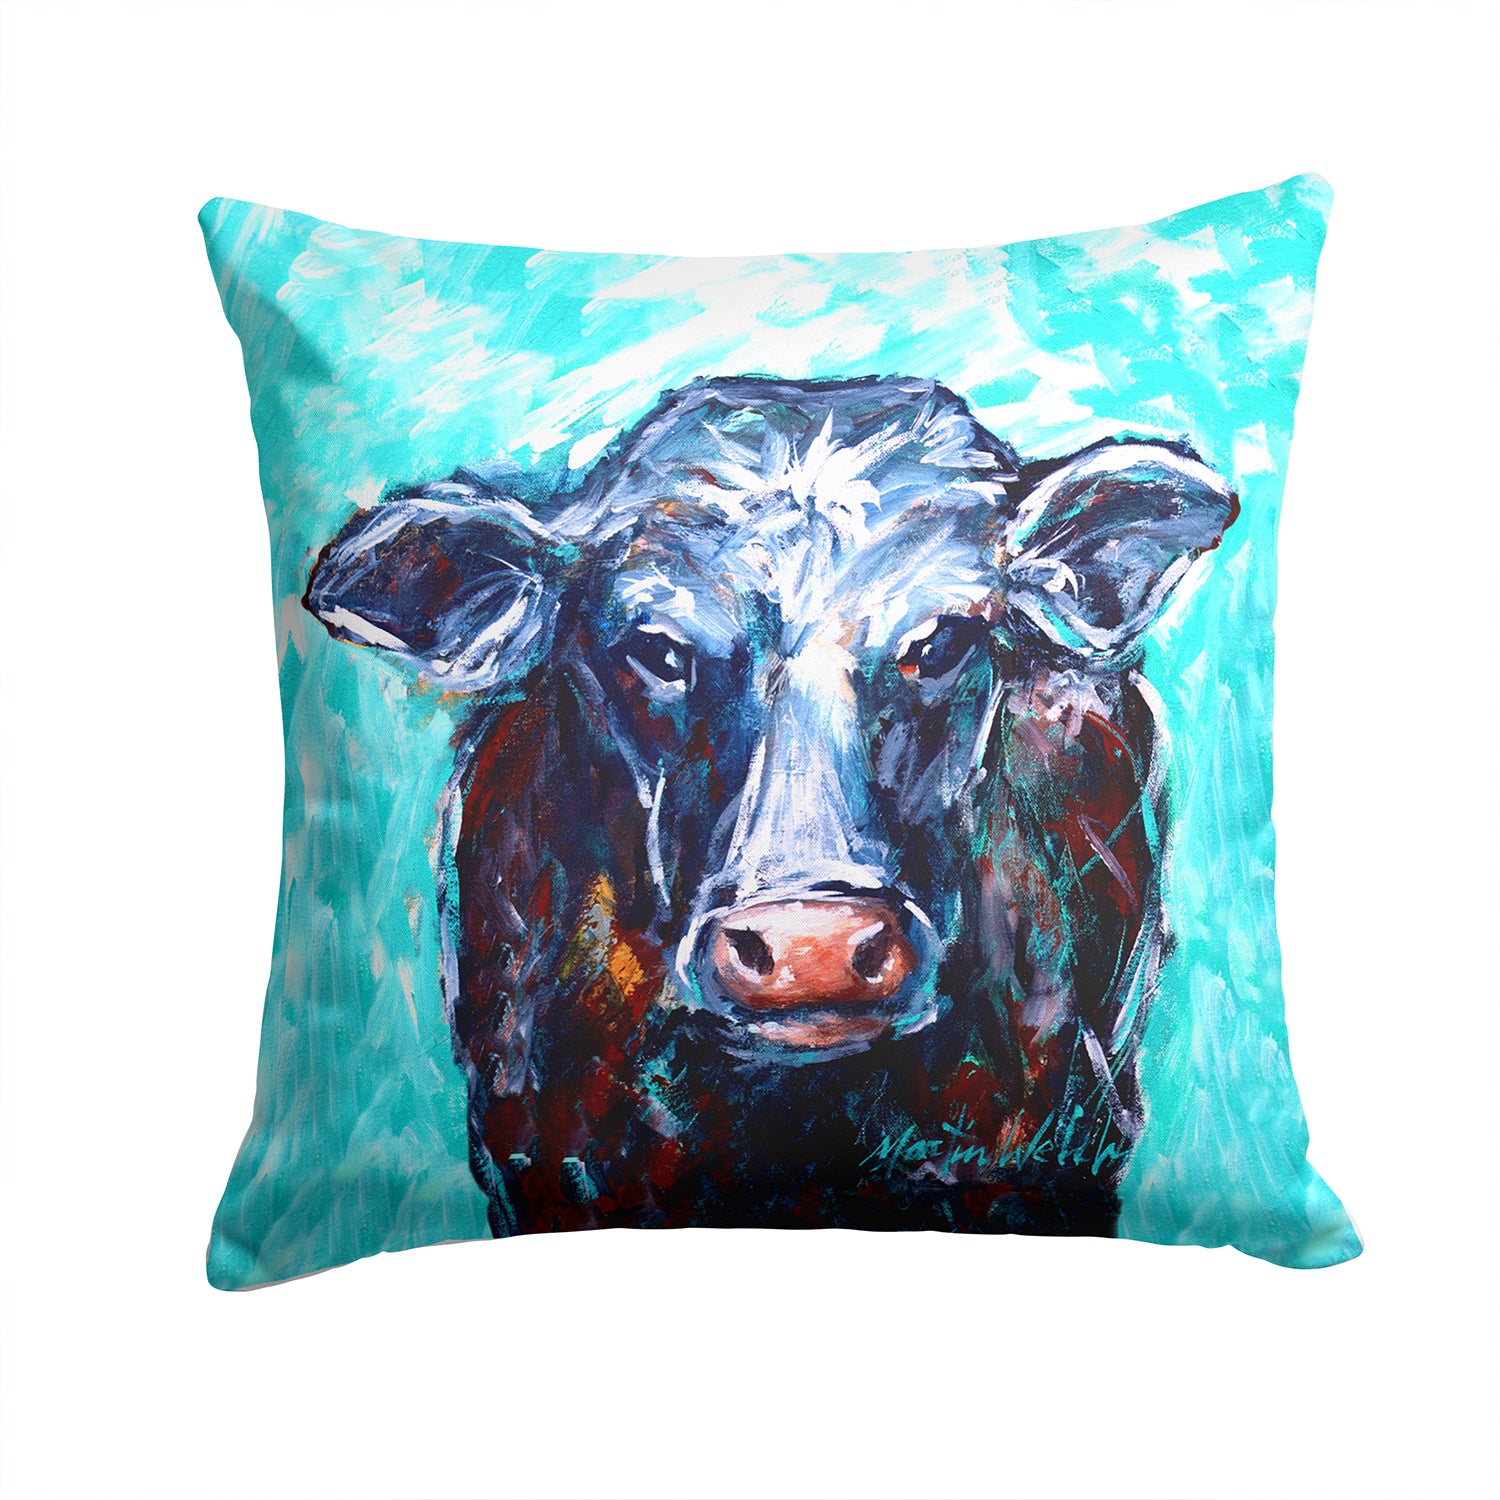 Buy this Moo Cow Fabric Decorative Pillow